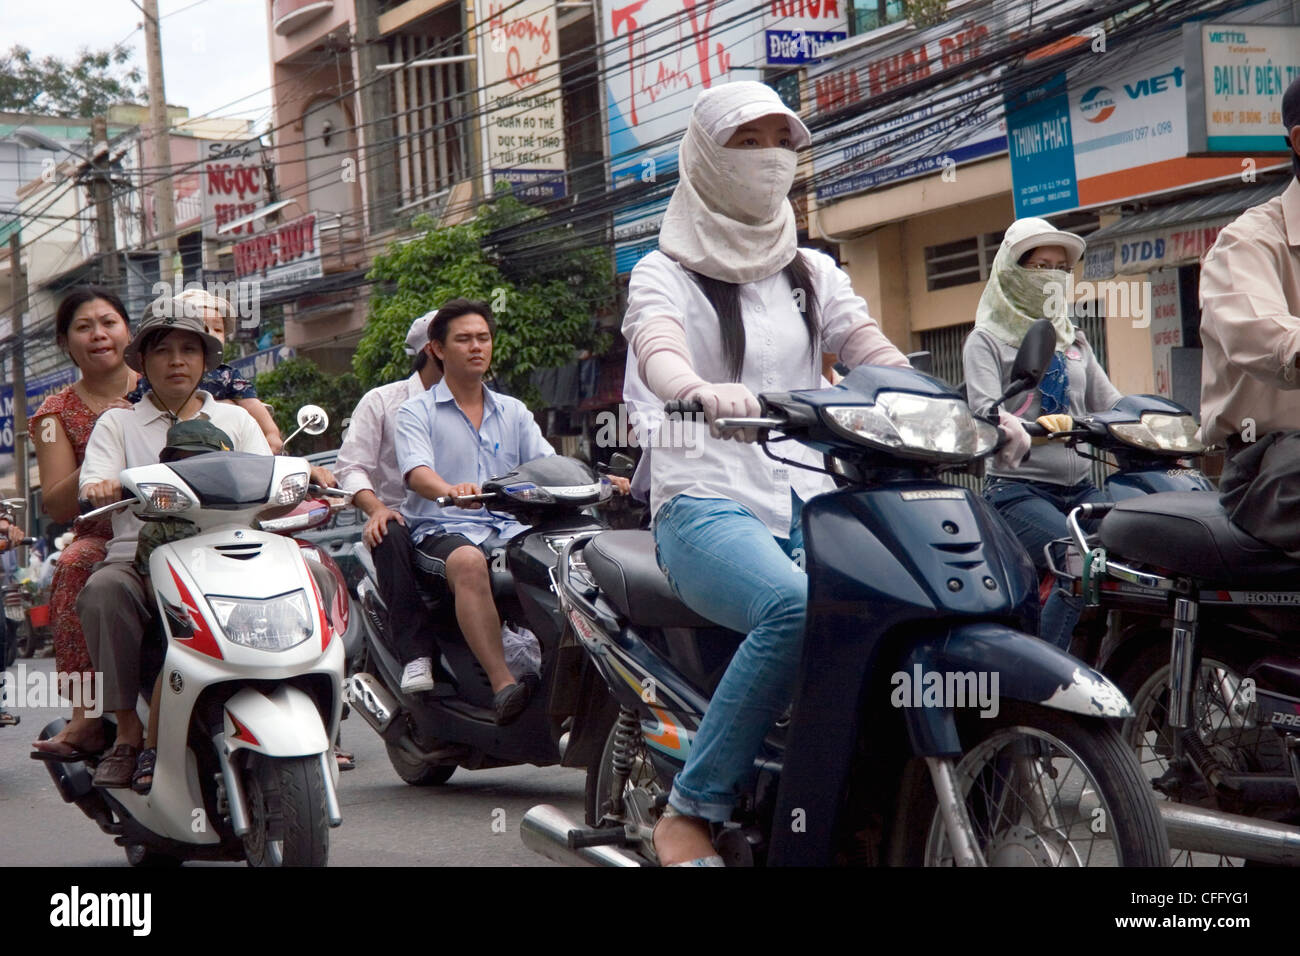 People are driving motorcycles in heavy traffic on a busy and crowded street in Saigon (Ho Chi Minh City) Vietnam. Stock Photo